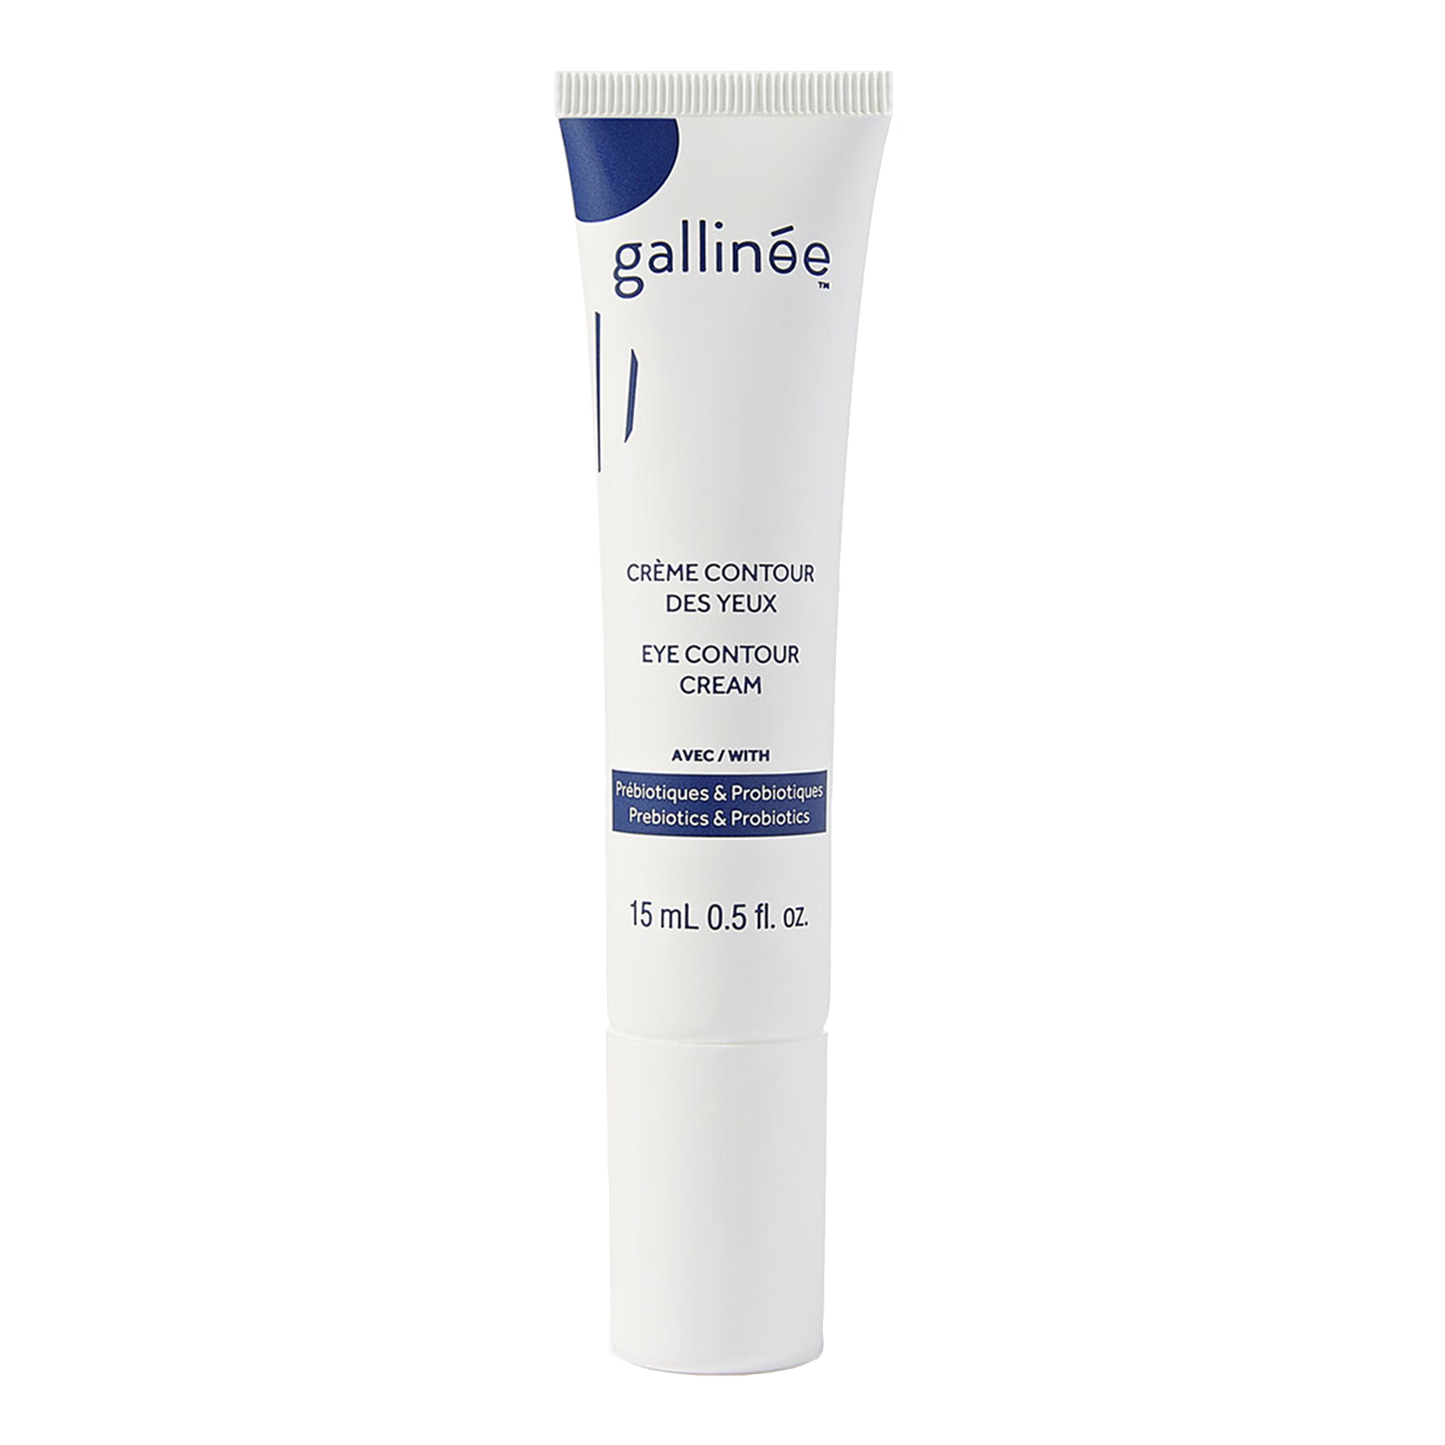 Gallinee Probiotic Eye Contour Cream: A concentrate of innovation and the best eye cream for sensitive eyes.  Support the fragile skin around the eyes thanks to probiotics and prebiotics.